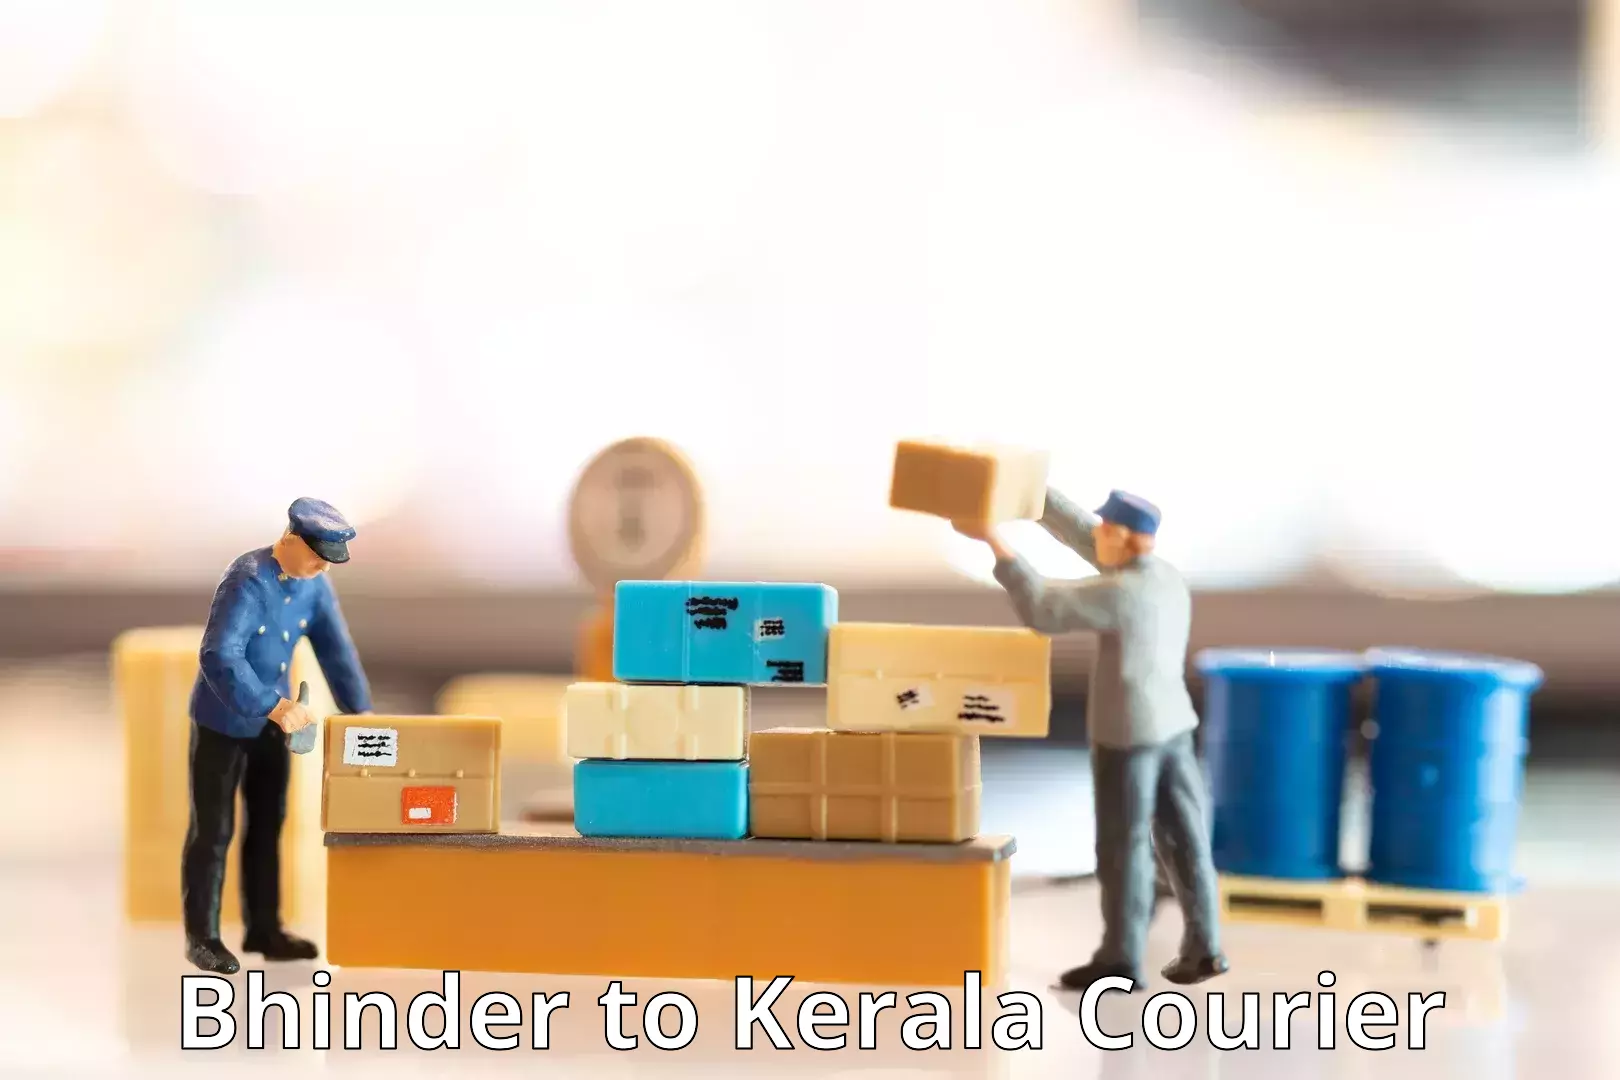 Modern courier technology in Bhinder to Adimali